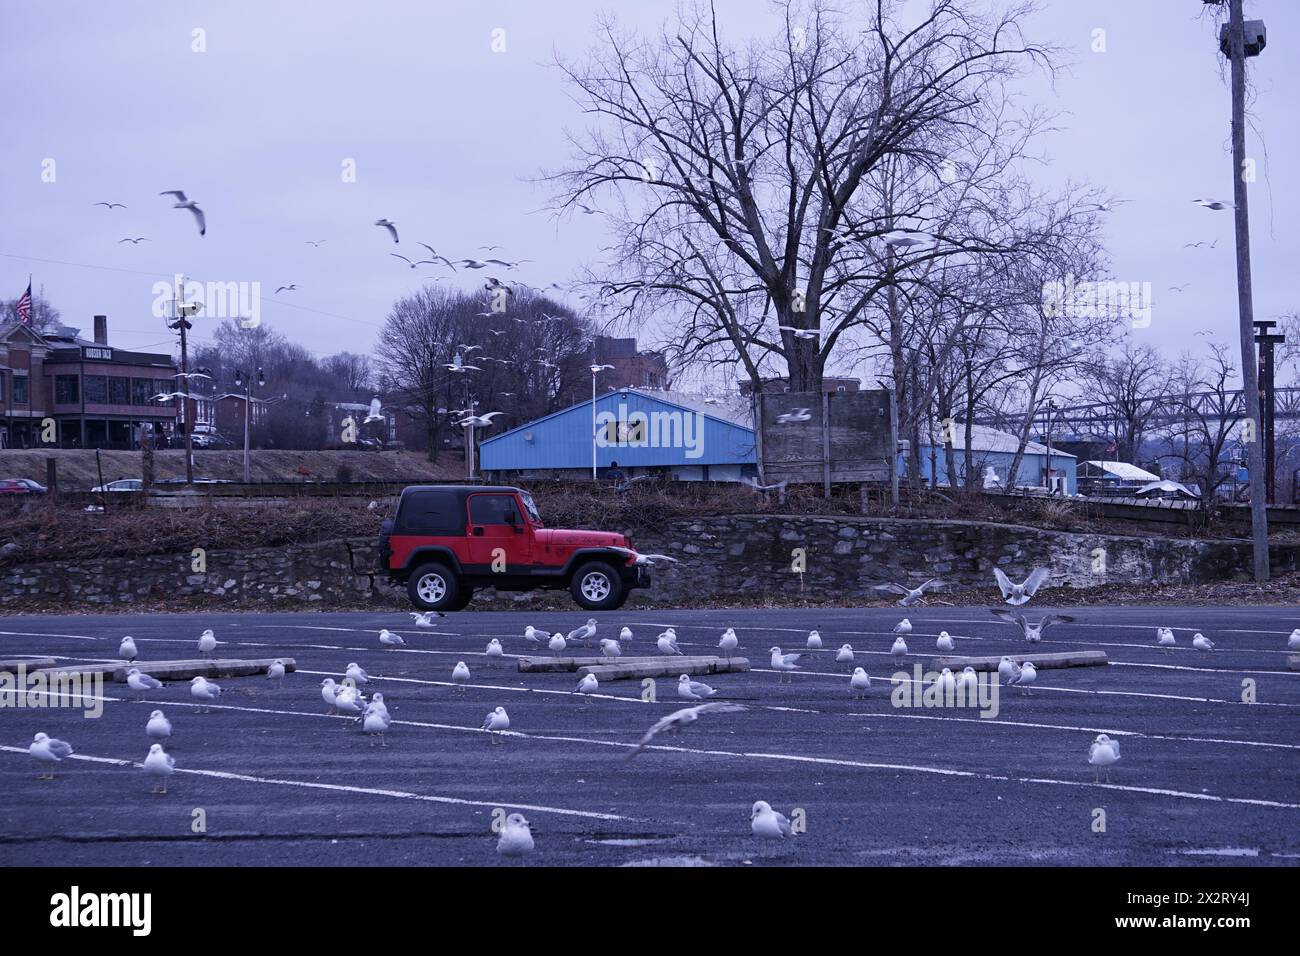 A flurry of seagulls takes over a deserted parking lot, juxtaposing the wild with the urban landscape Stock Photo